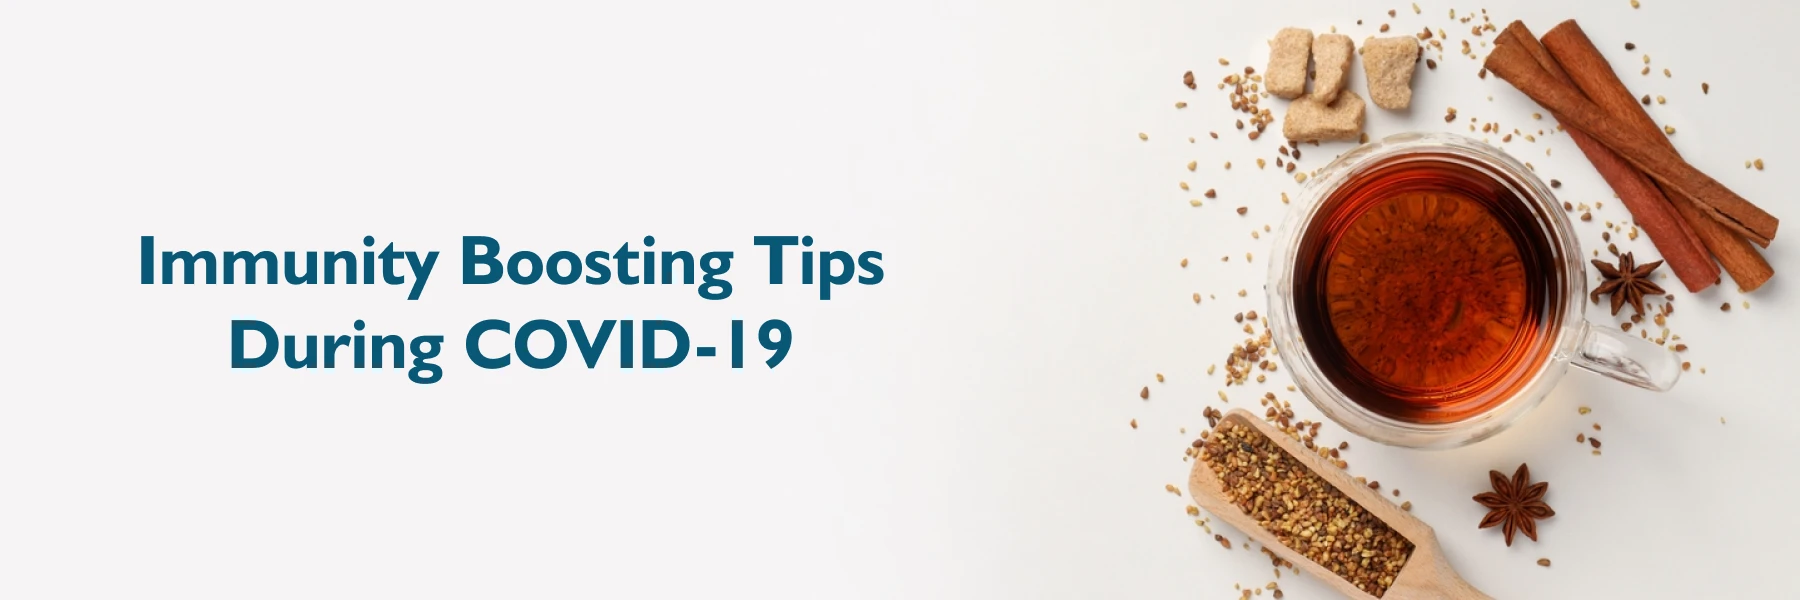 Immunity Boosting Tips During COVID-19